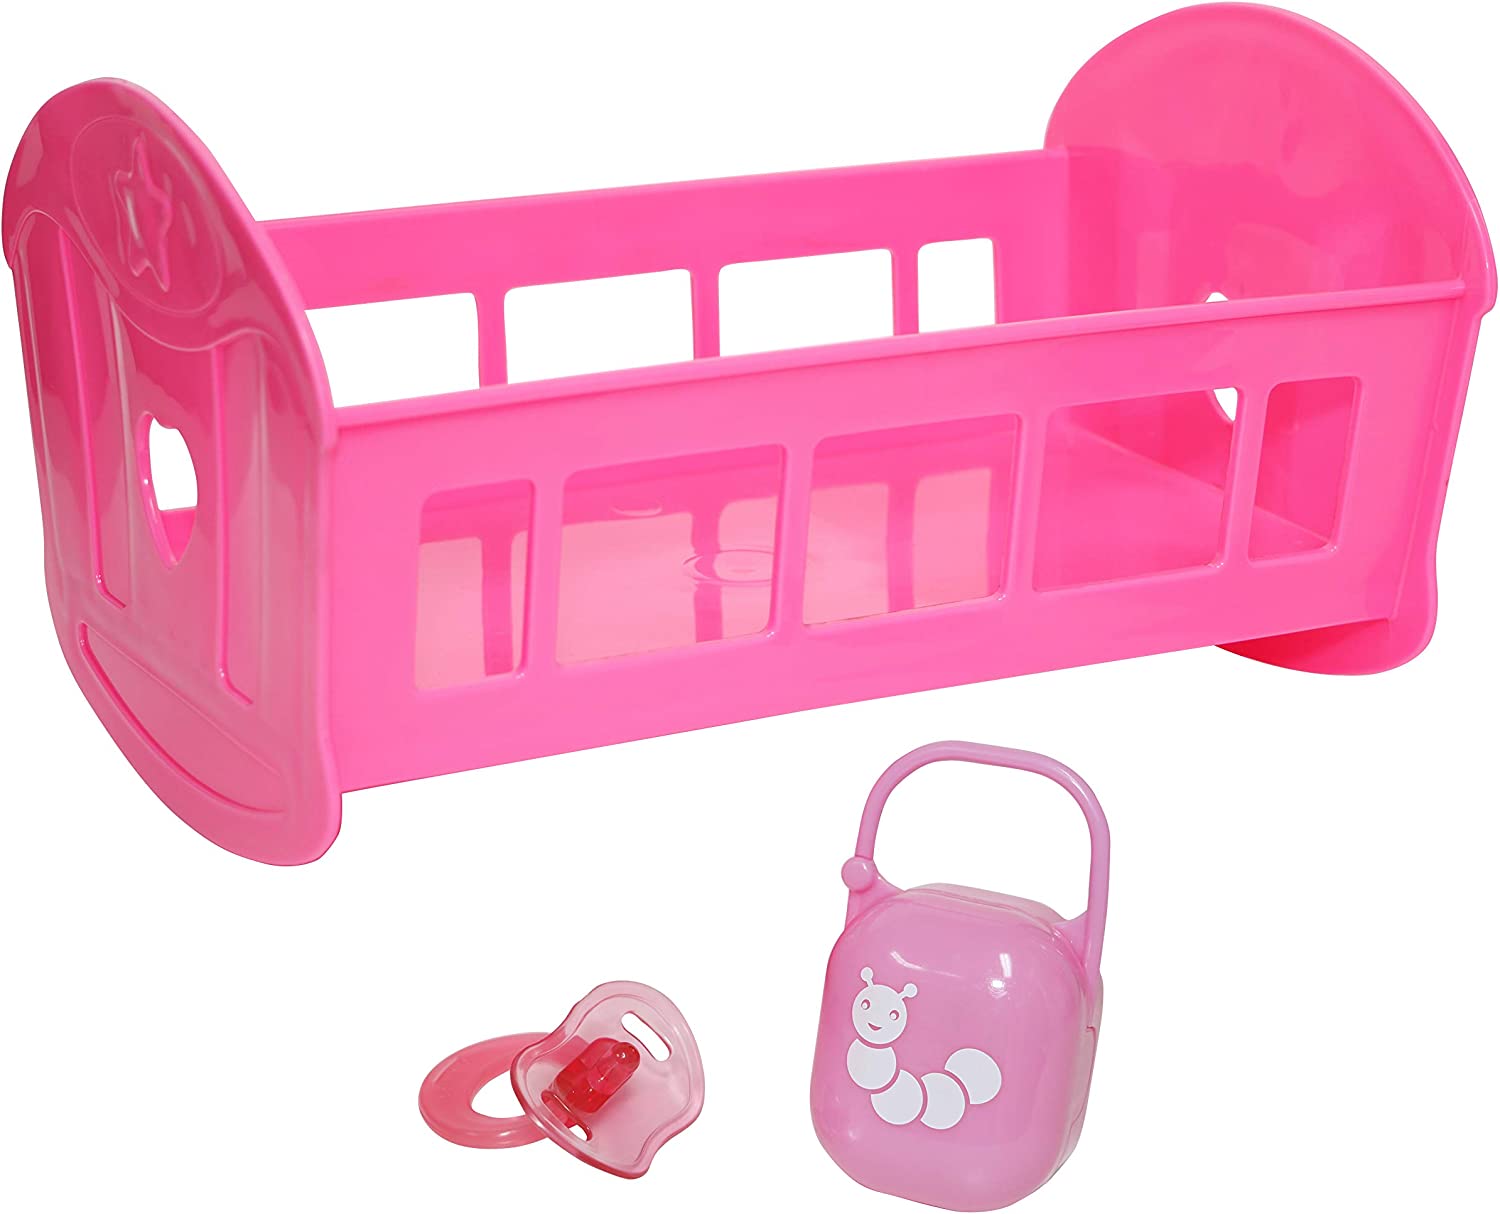 JC Toys For Keeps Playtime! Baby Doll High Chair and Play Accessories -  20241105